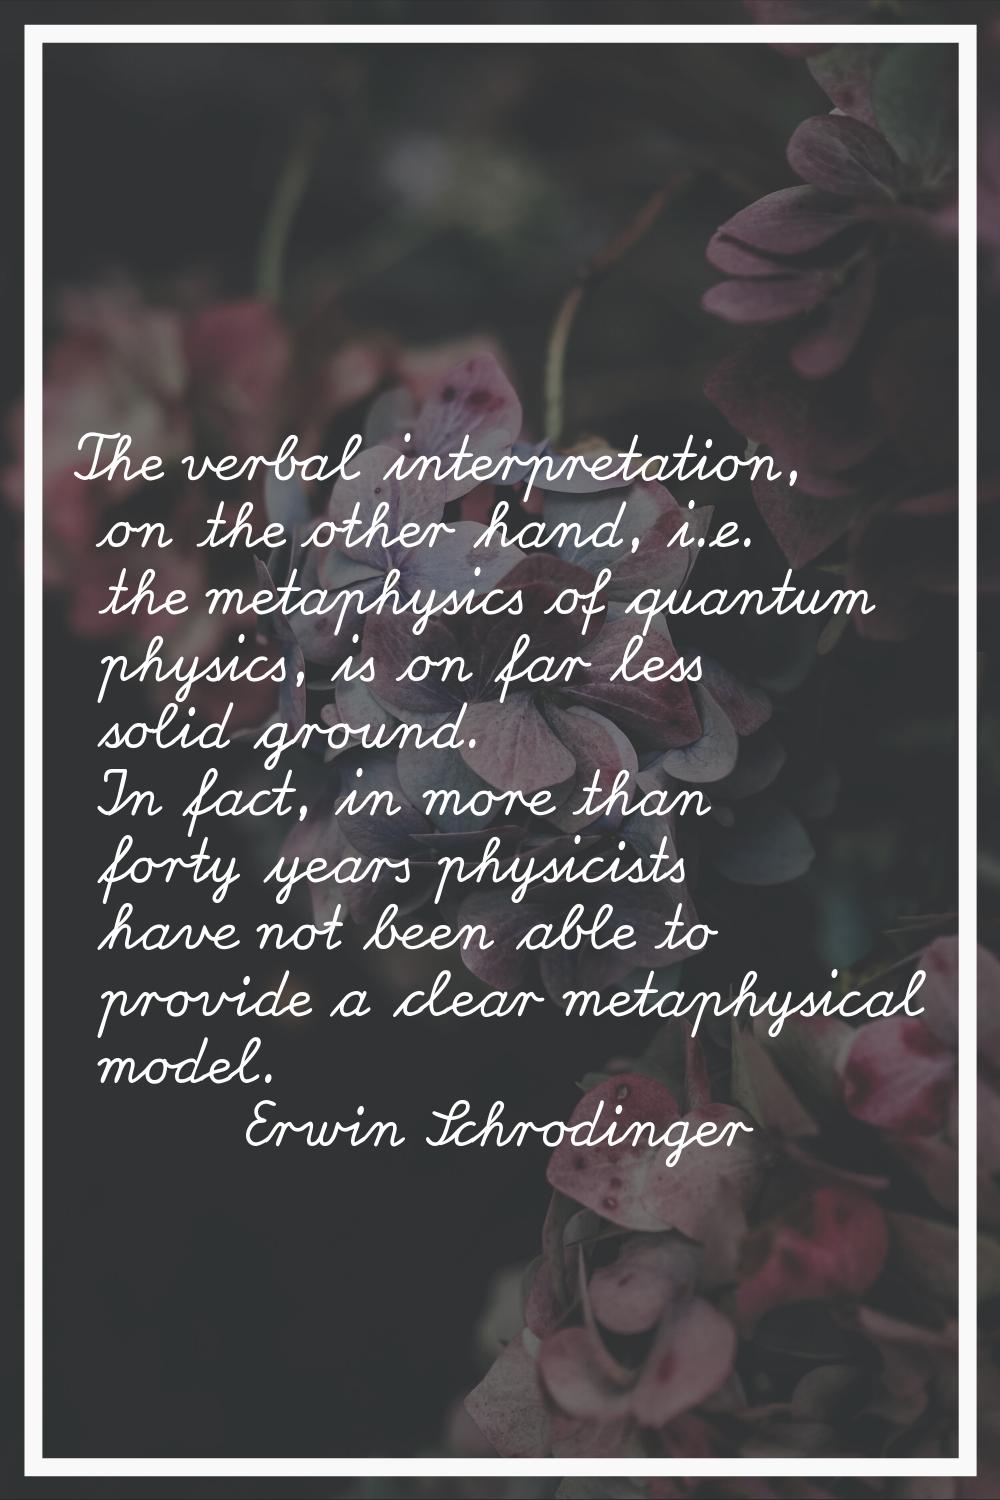 The verbal interpretation, on the other hand, i.e. the metaphysics of quantum physics, is on far le